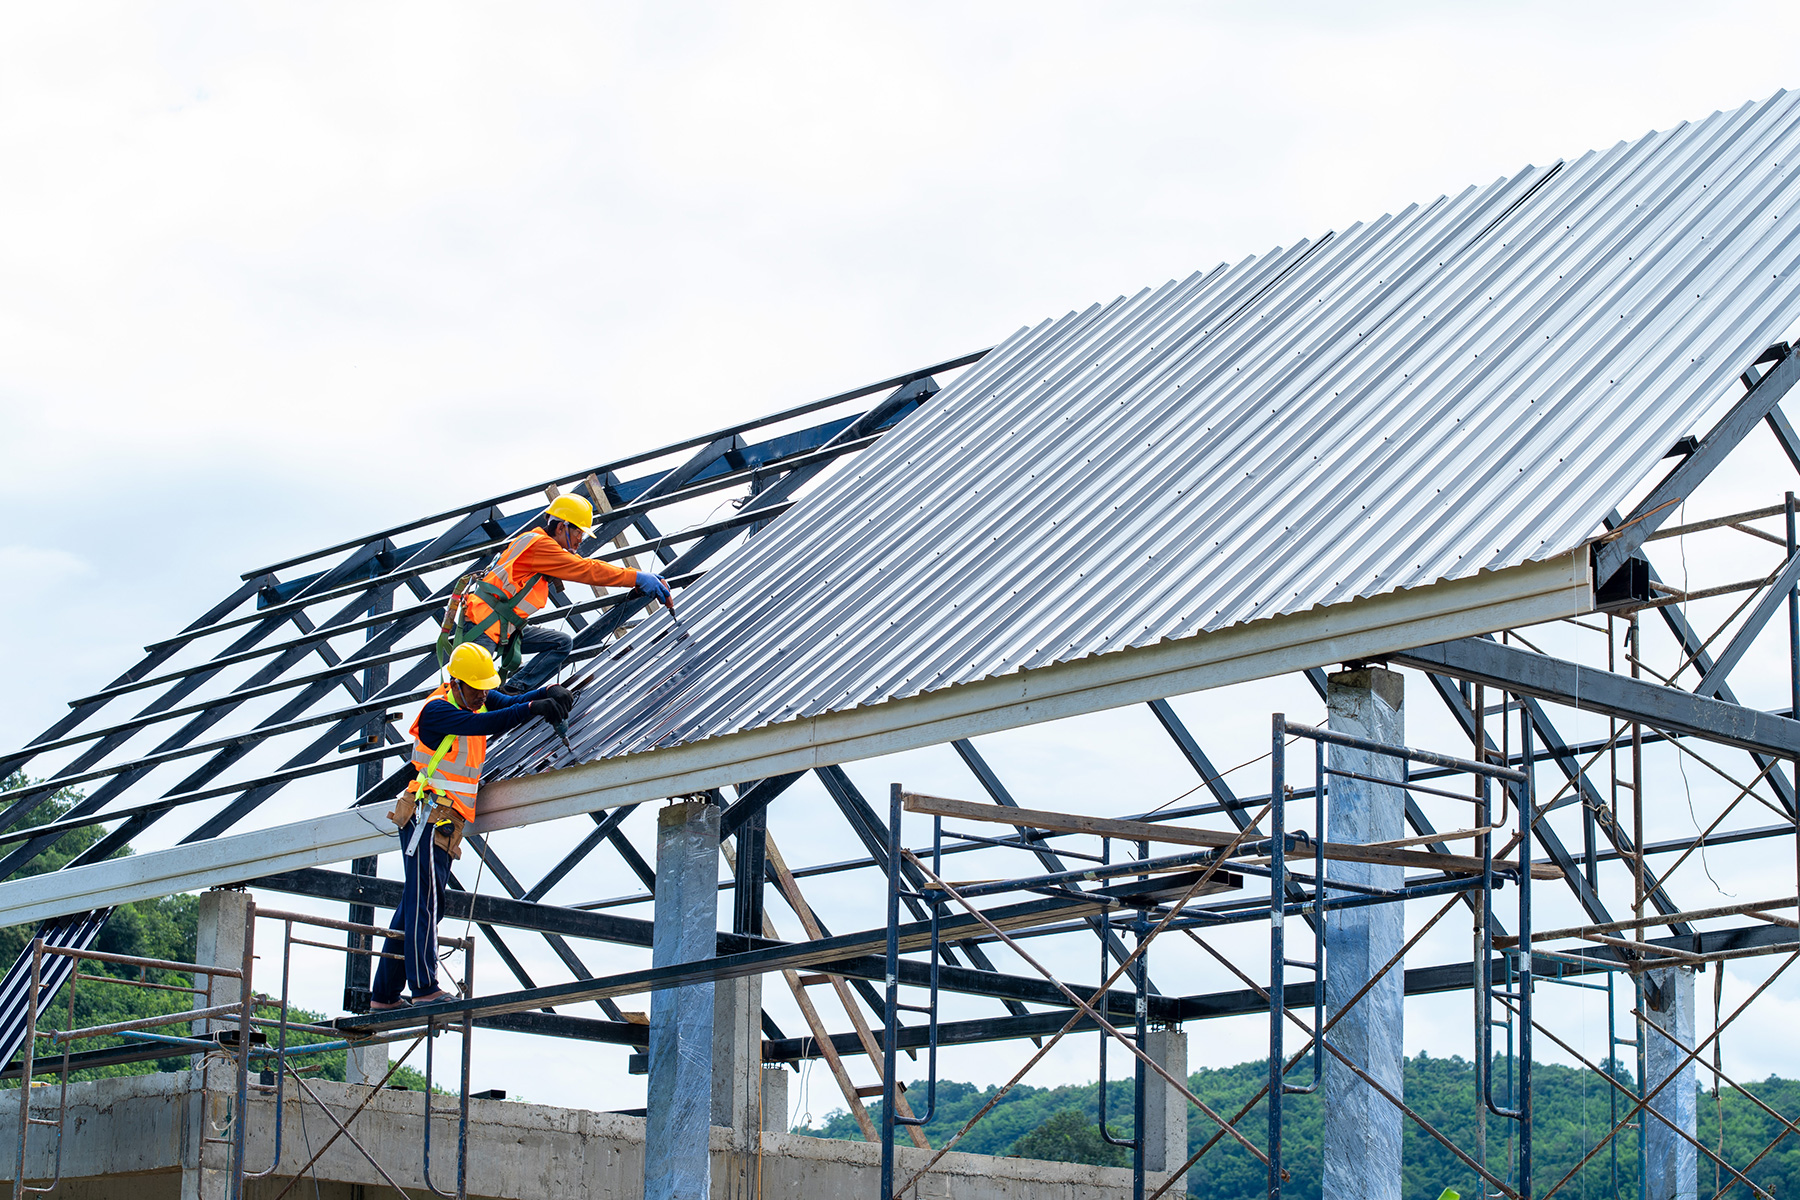 Construction workers building a roof